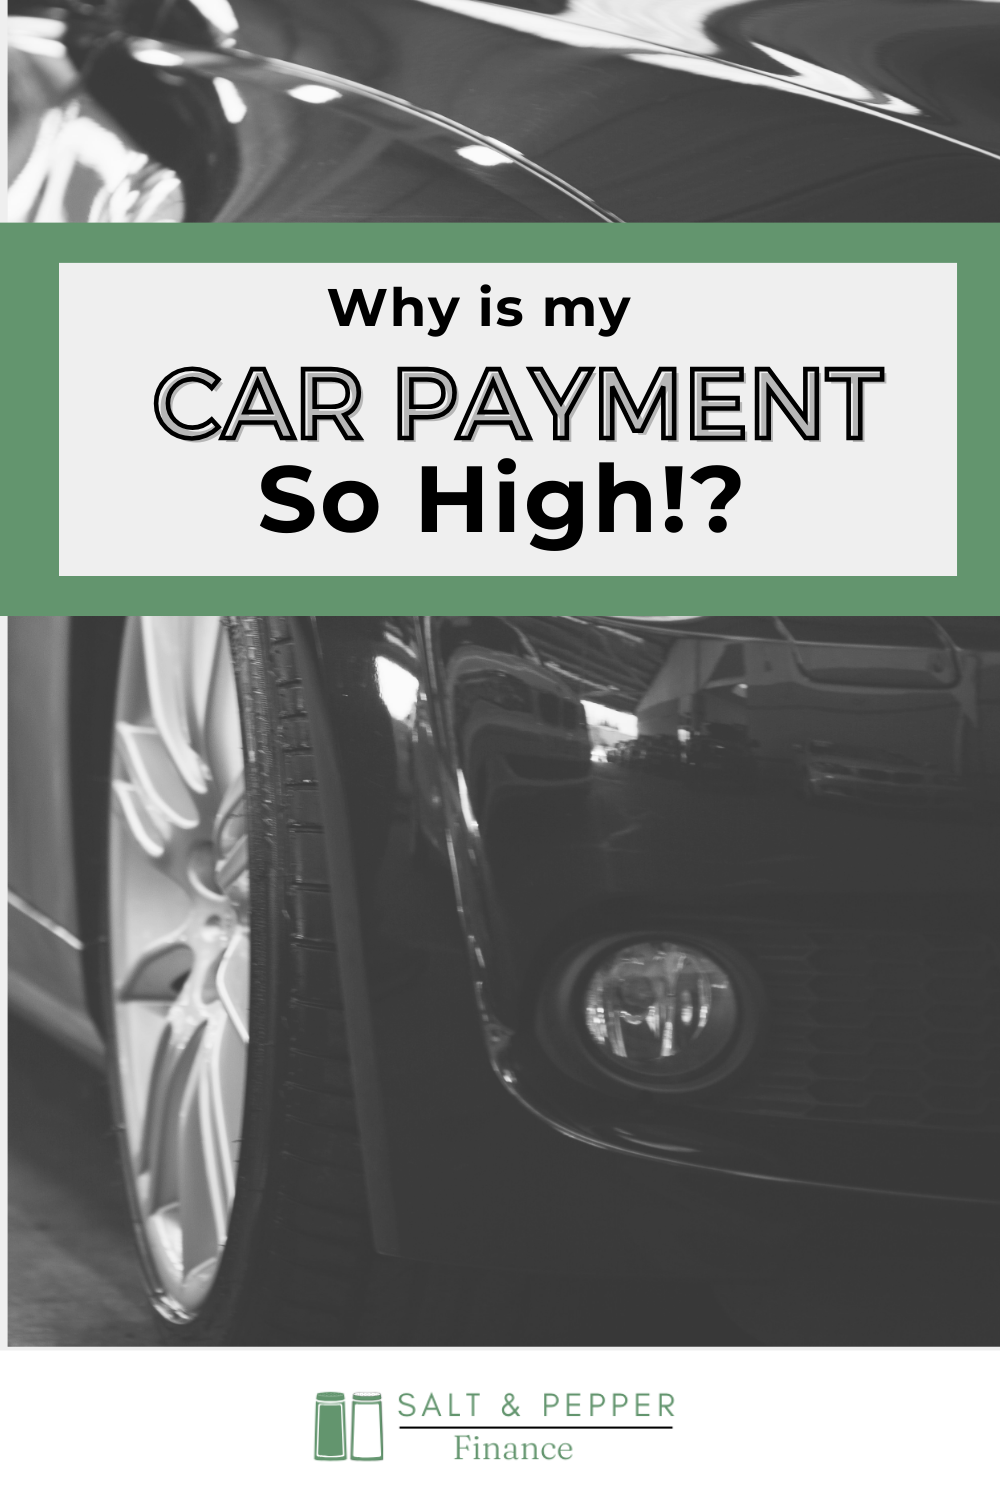 Why Is My Car Payment So High?